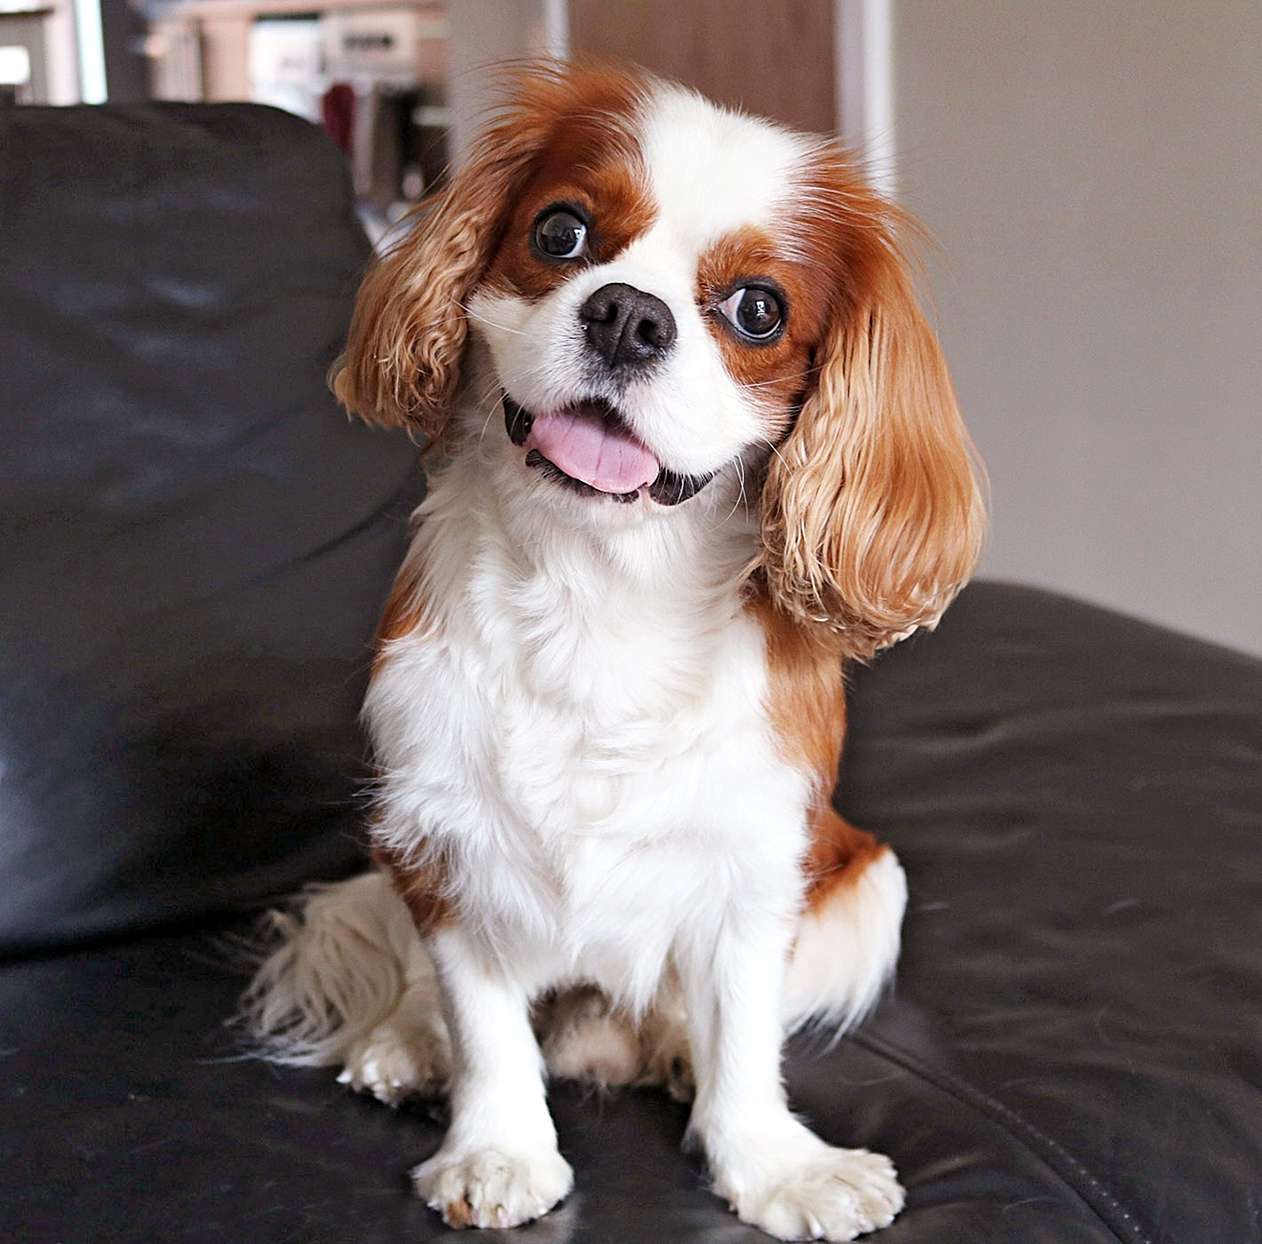 Close-Up Portrait Of Cavalier King Charles Spaniel Relaxing On Sofa At Home